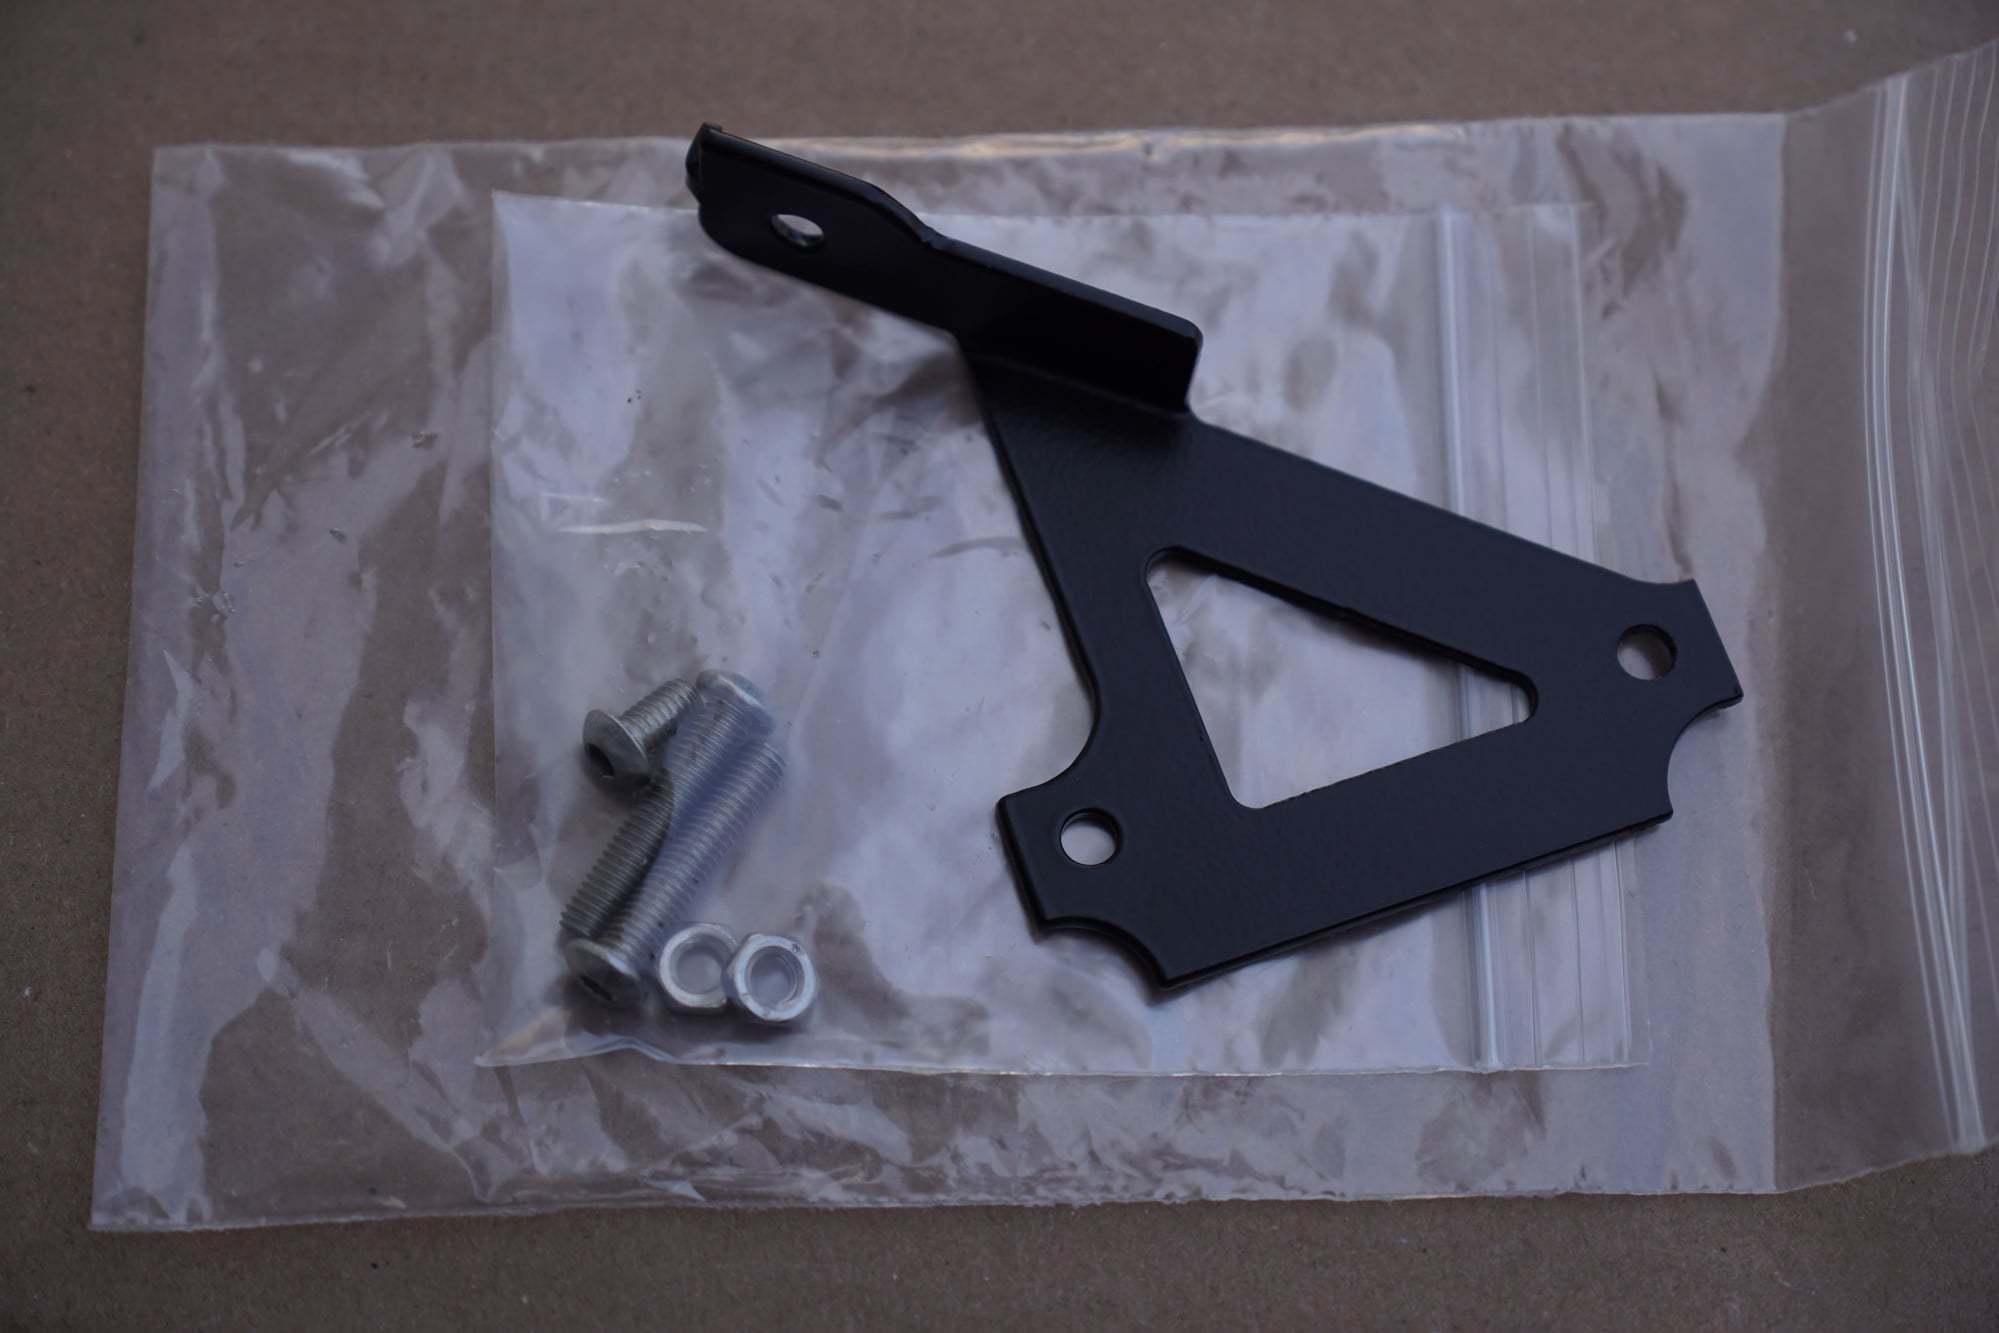 Engine - Power Adders - SS Oil Filler Neck, Pulley Kit, SBG MAP Bracket and Powerflex - New - 1992 to 2002 Mazda RX-7 - Chicago, IL 60605, United States